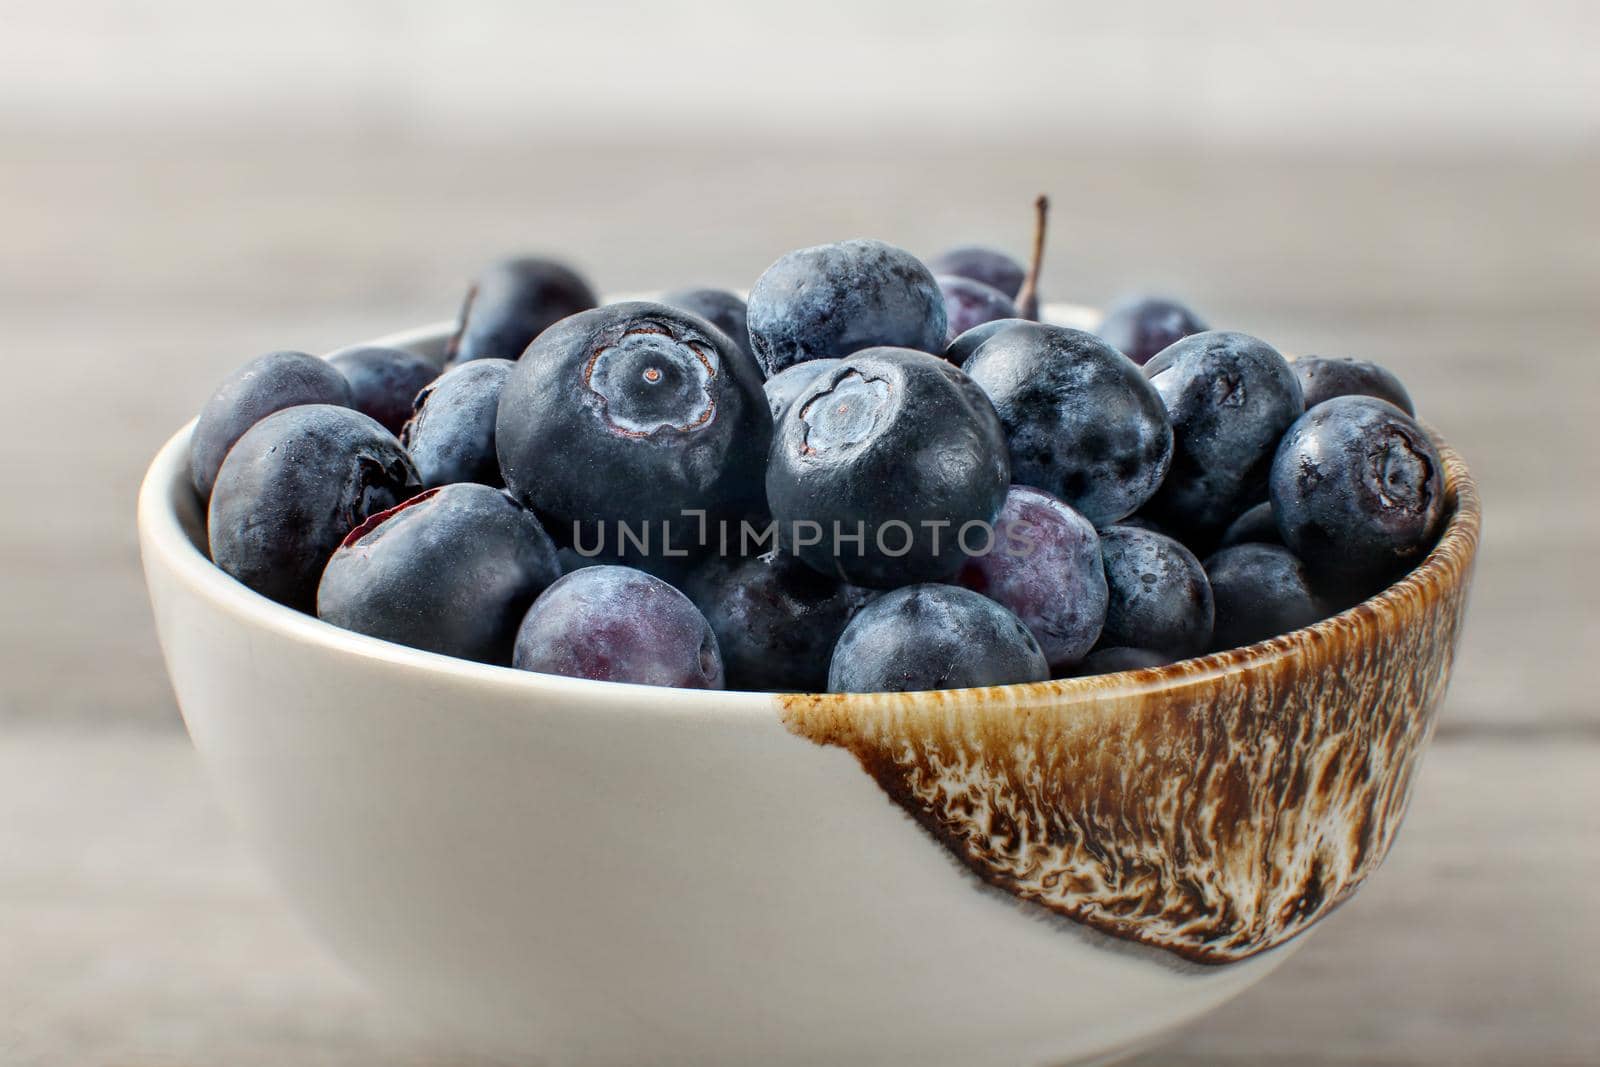 Detail on blueberries in small ceramic bowl.